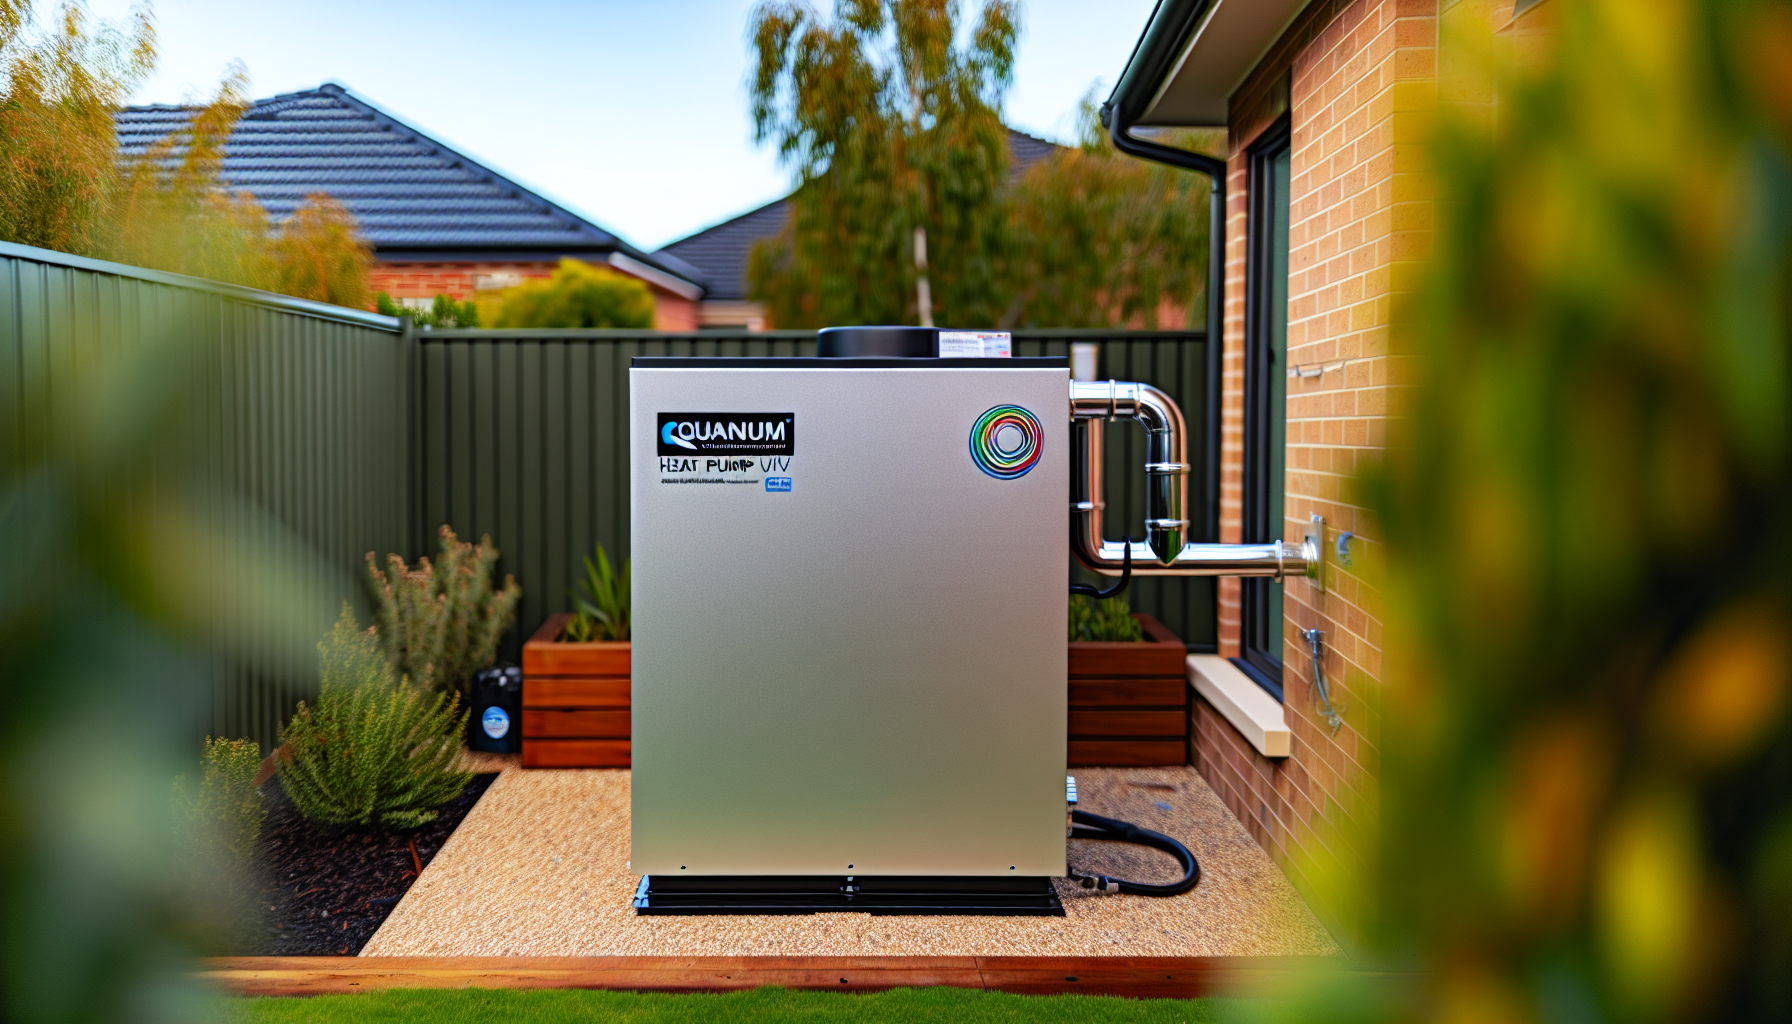 Photo of a quantum heat pump hot water system installed in a residential setting